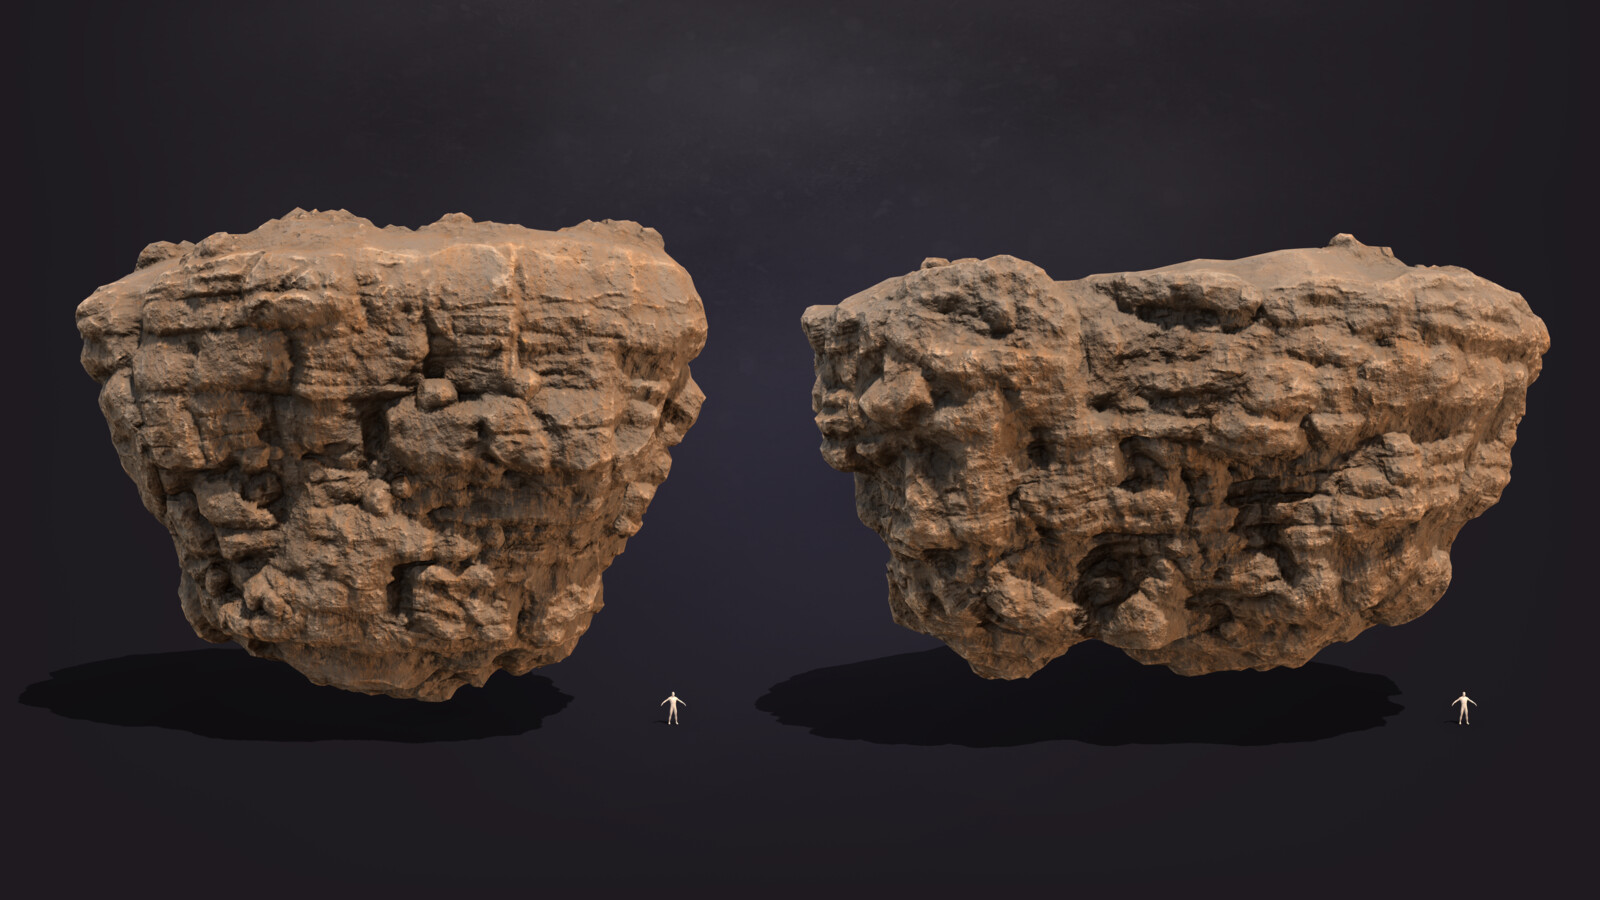 a different cliff rock set - similar to the cliff wall being modular to create bigger rock formations